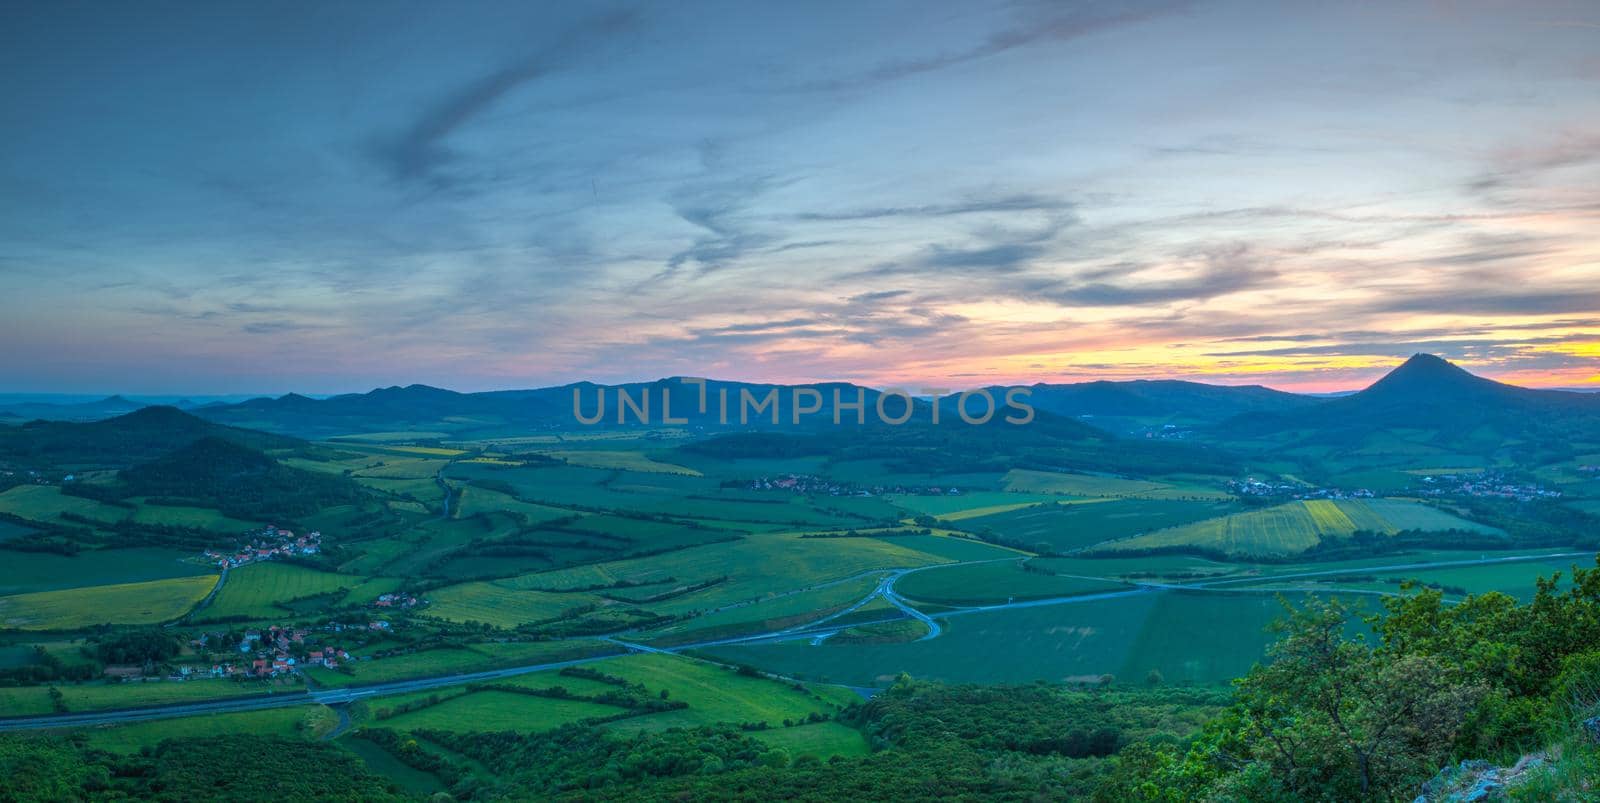 View from Lovos Hill. Sunset  in Central Bohemian Highlands, Czech Republic. Central Bohemian Uplands  is a mountain range located in northern Bohemia. The range is about 80 km long.